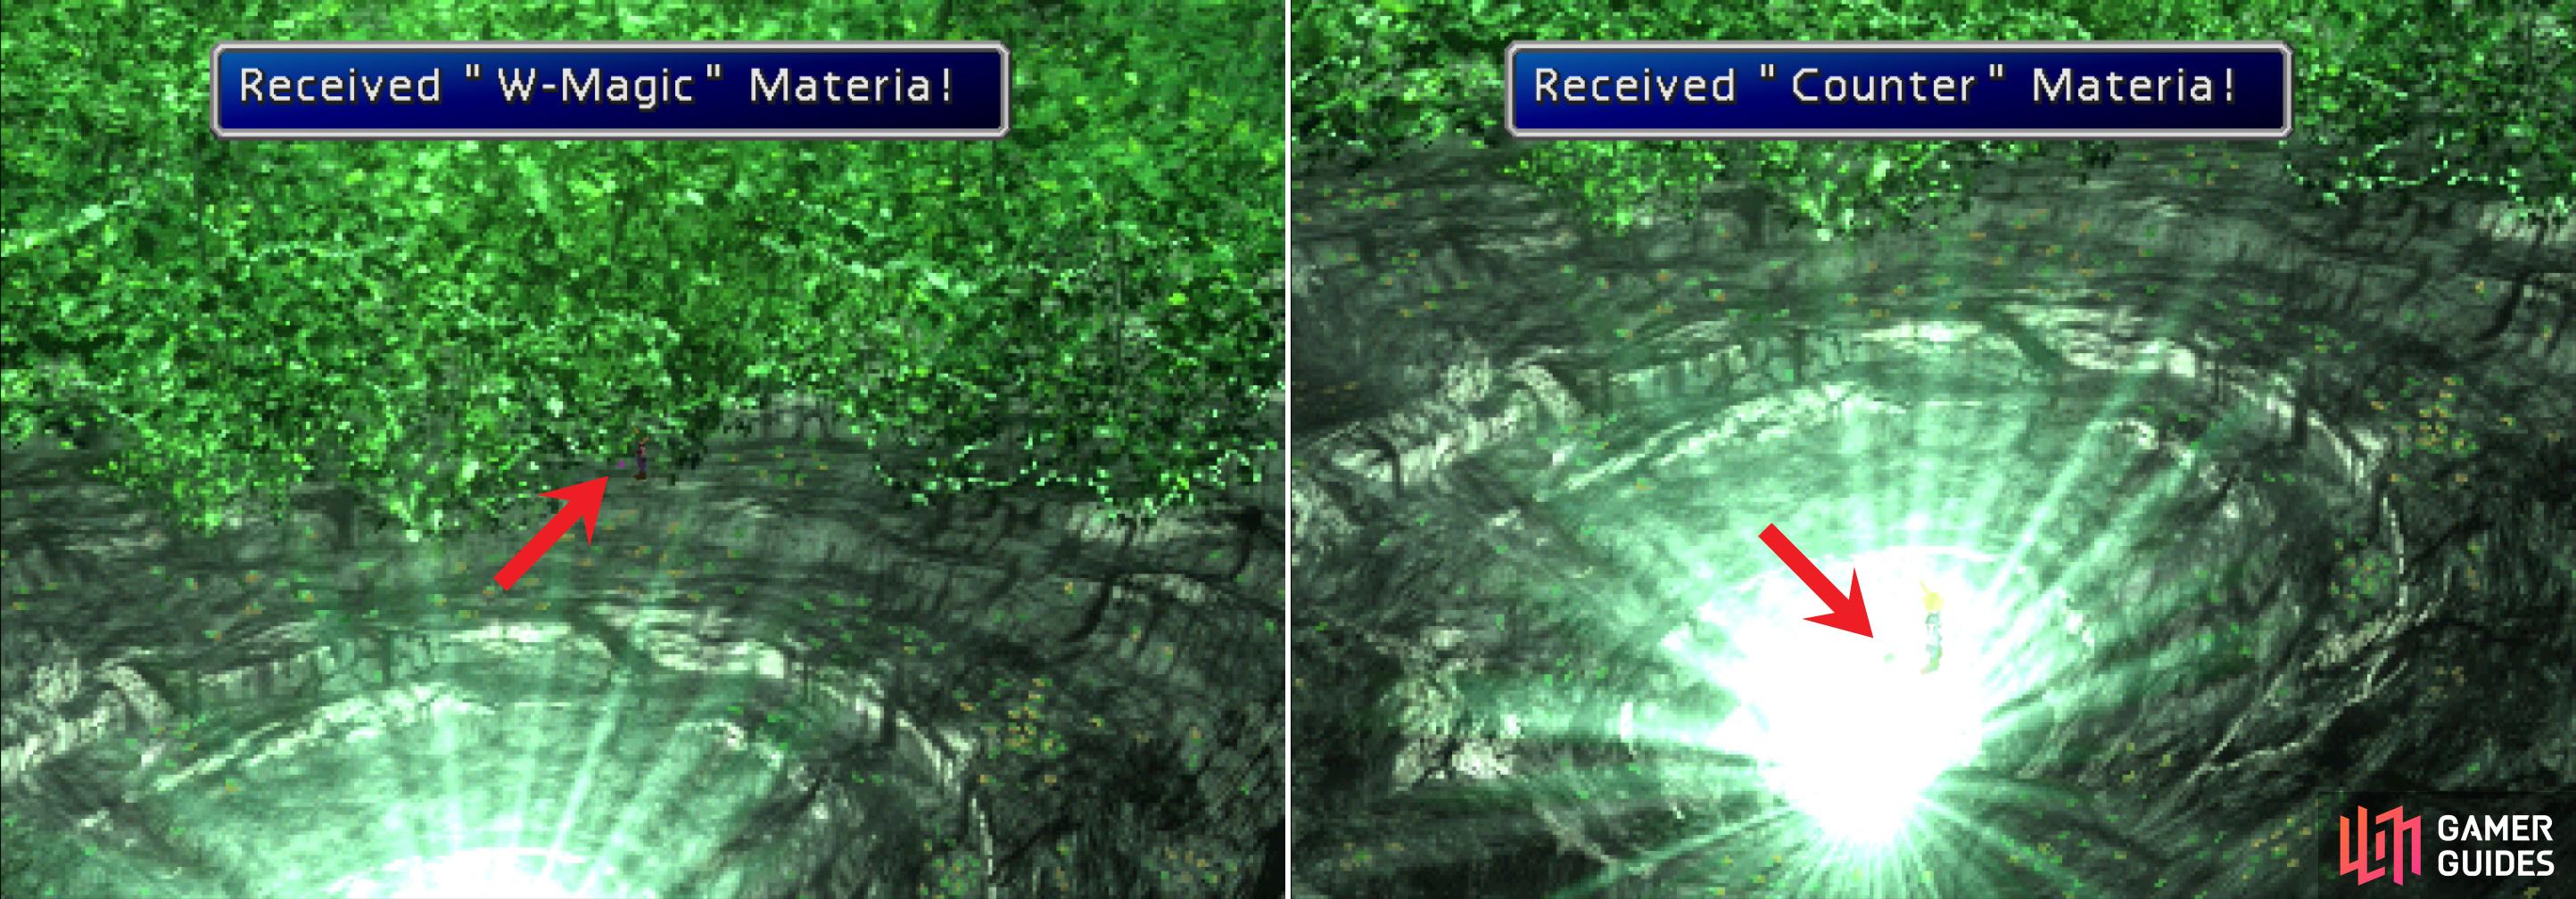 You can find some W-Magic Materia hiding behind some leaves (left) and hidden in a glowing pool of light is the immensely useful Counter Materia (right).